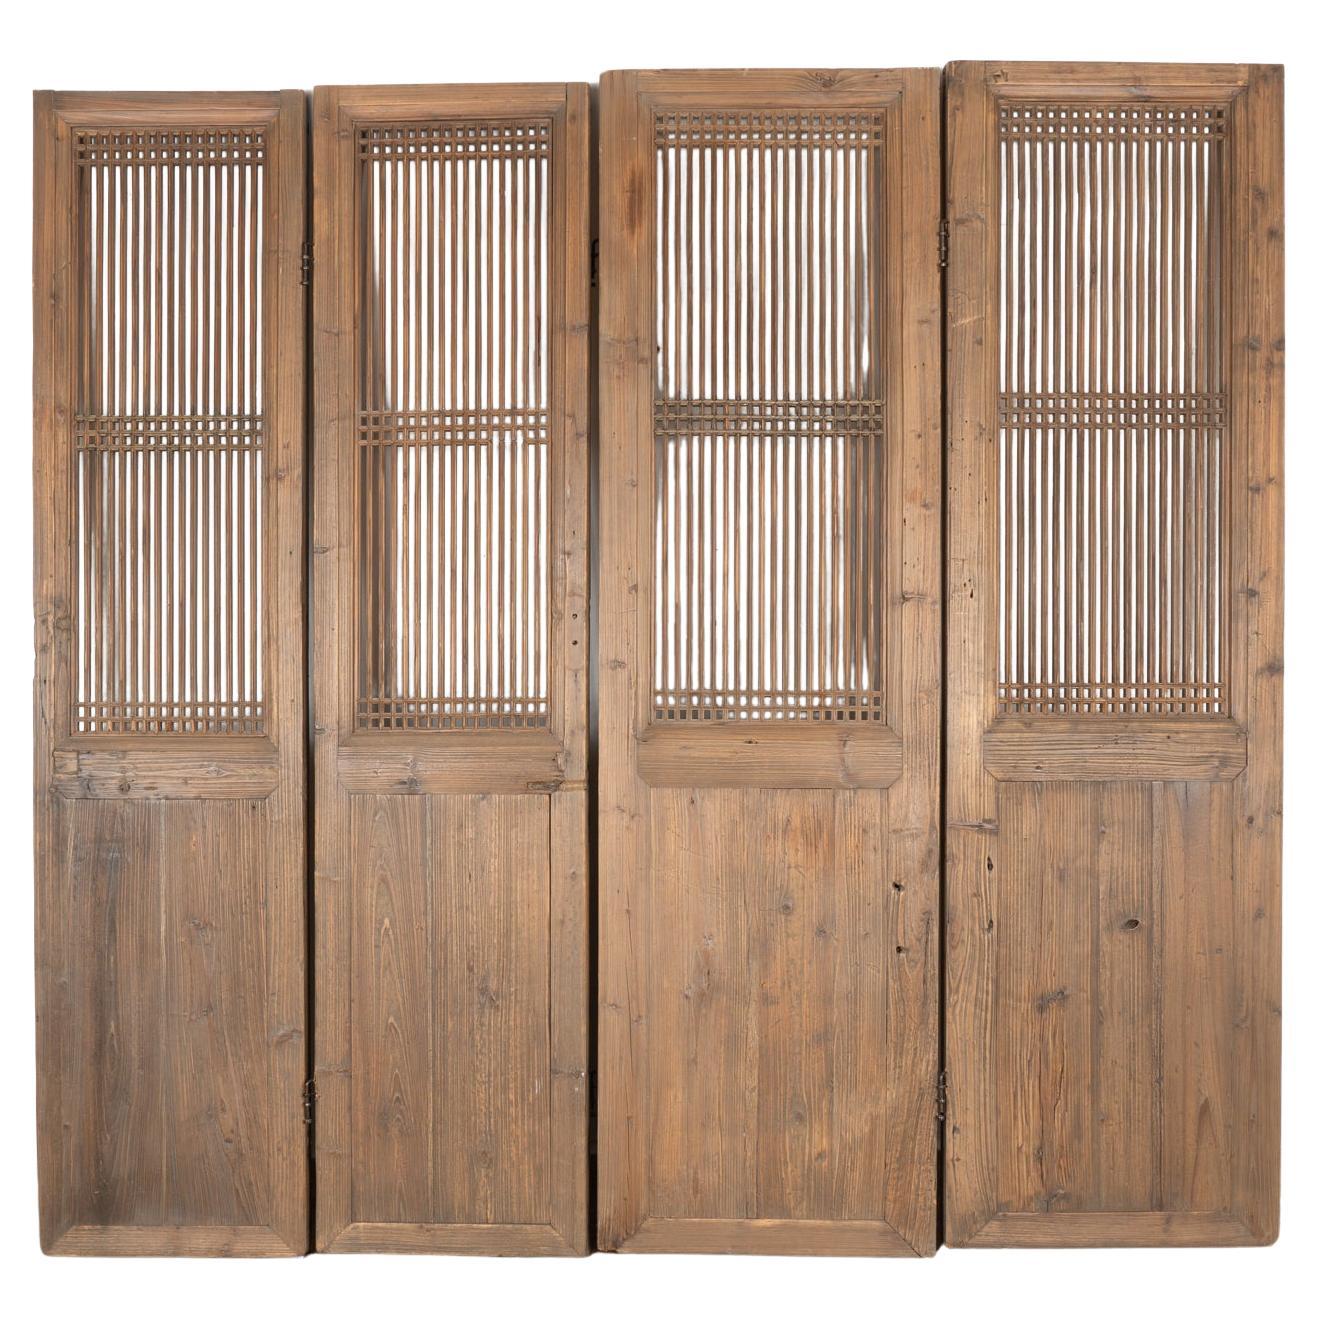 Set of Four Elm Folding Screen Room Dividers, China circa 1880 For Sale